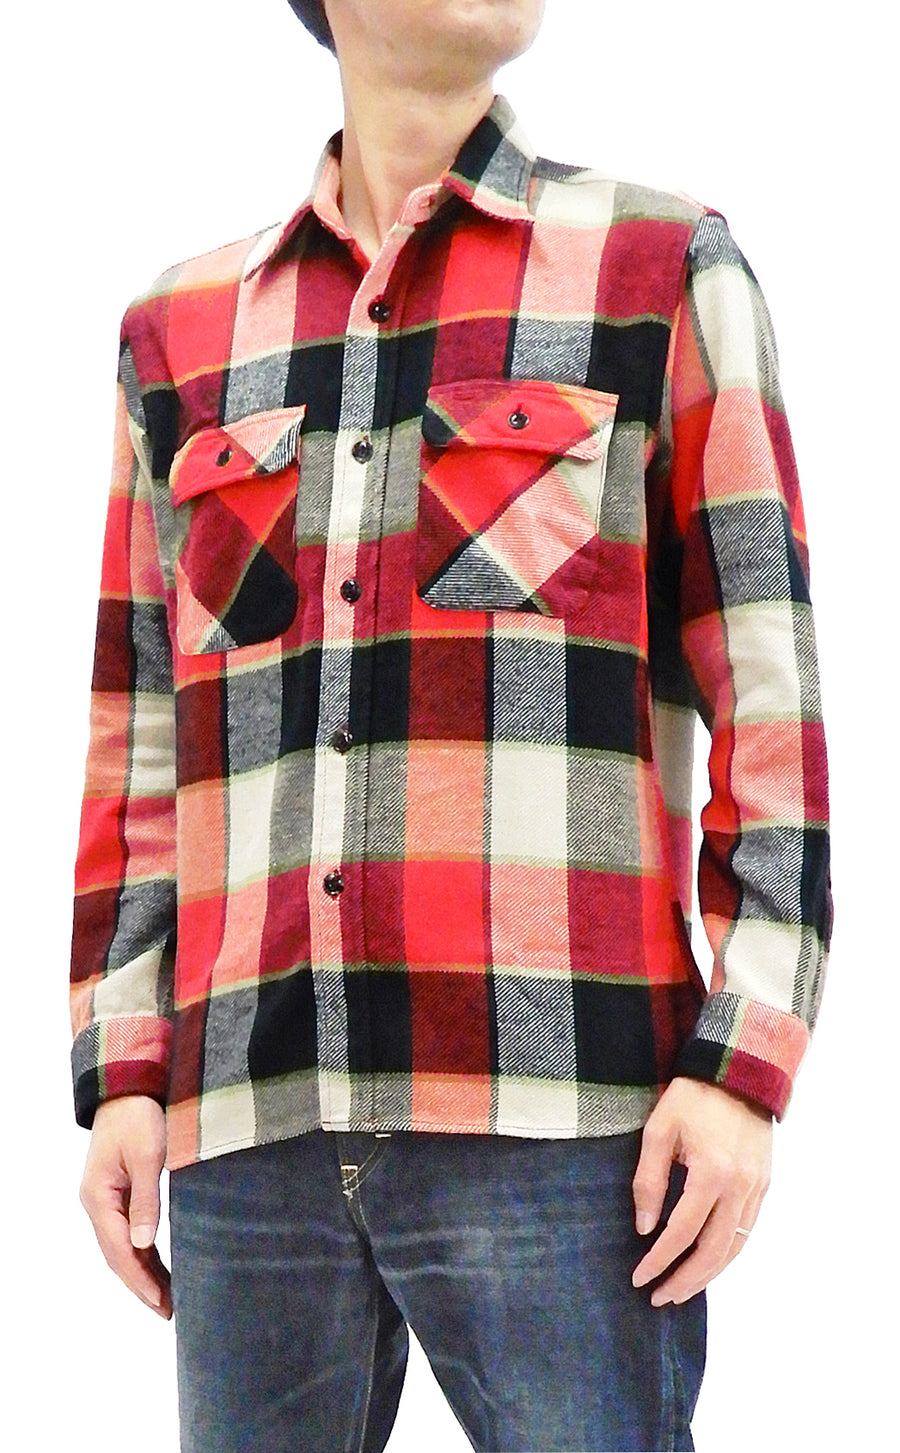 Shop looks for「Soft Brushed Checked Long Sleeve Shirt、Stretch